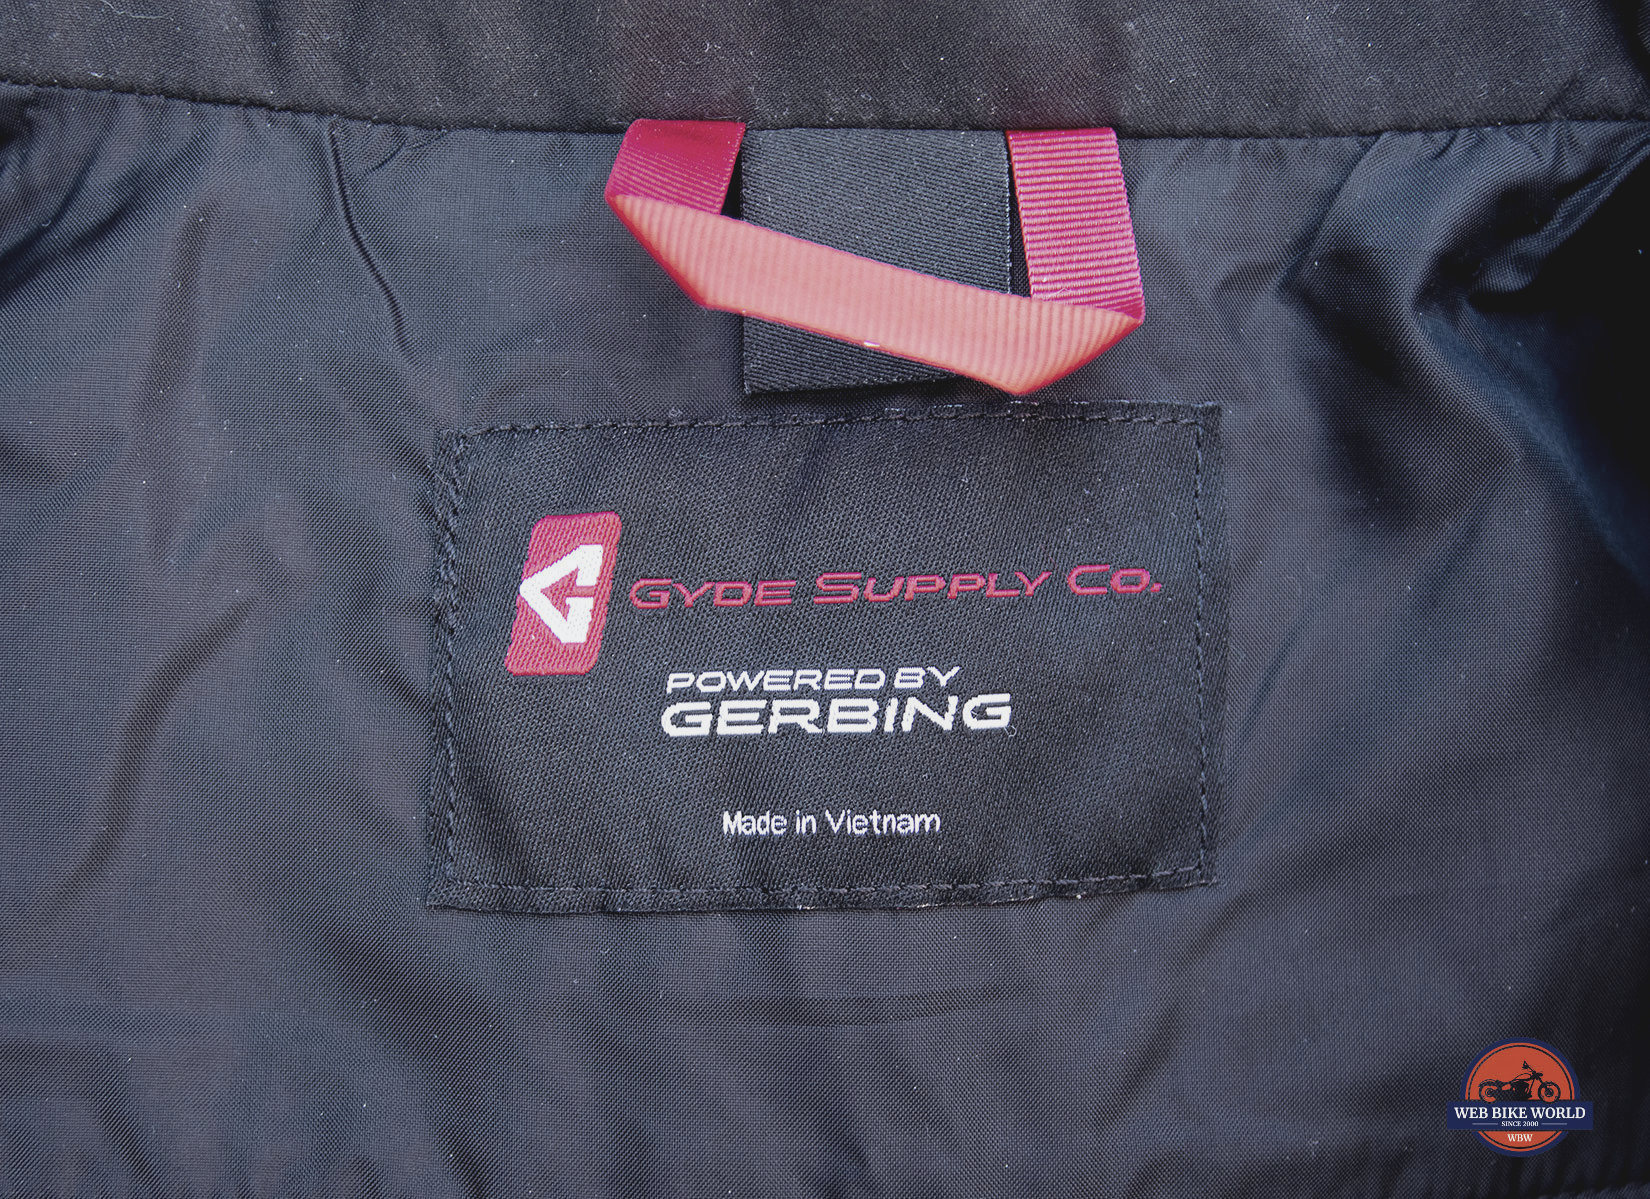 Gerbing heated vests are manufactured in Vietnam.